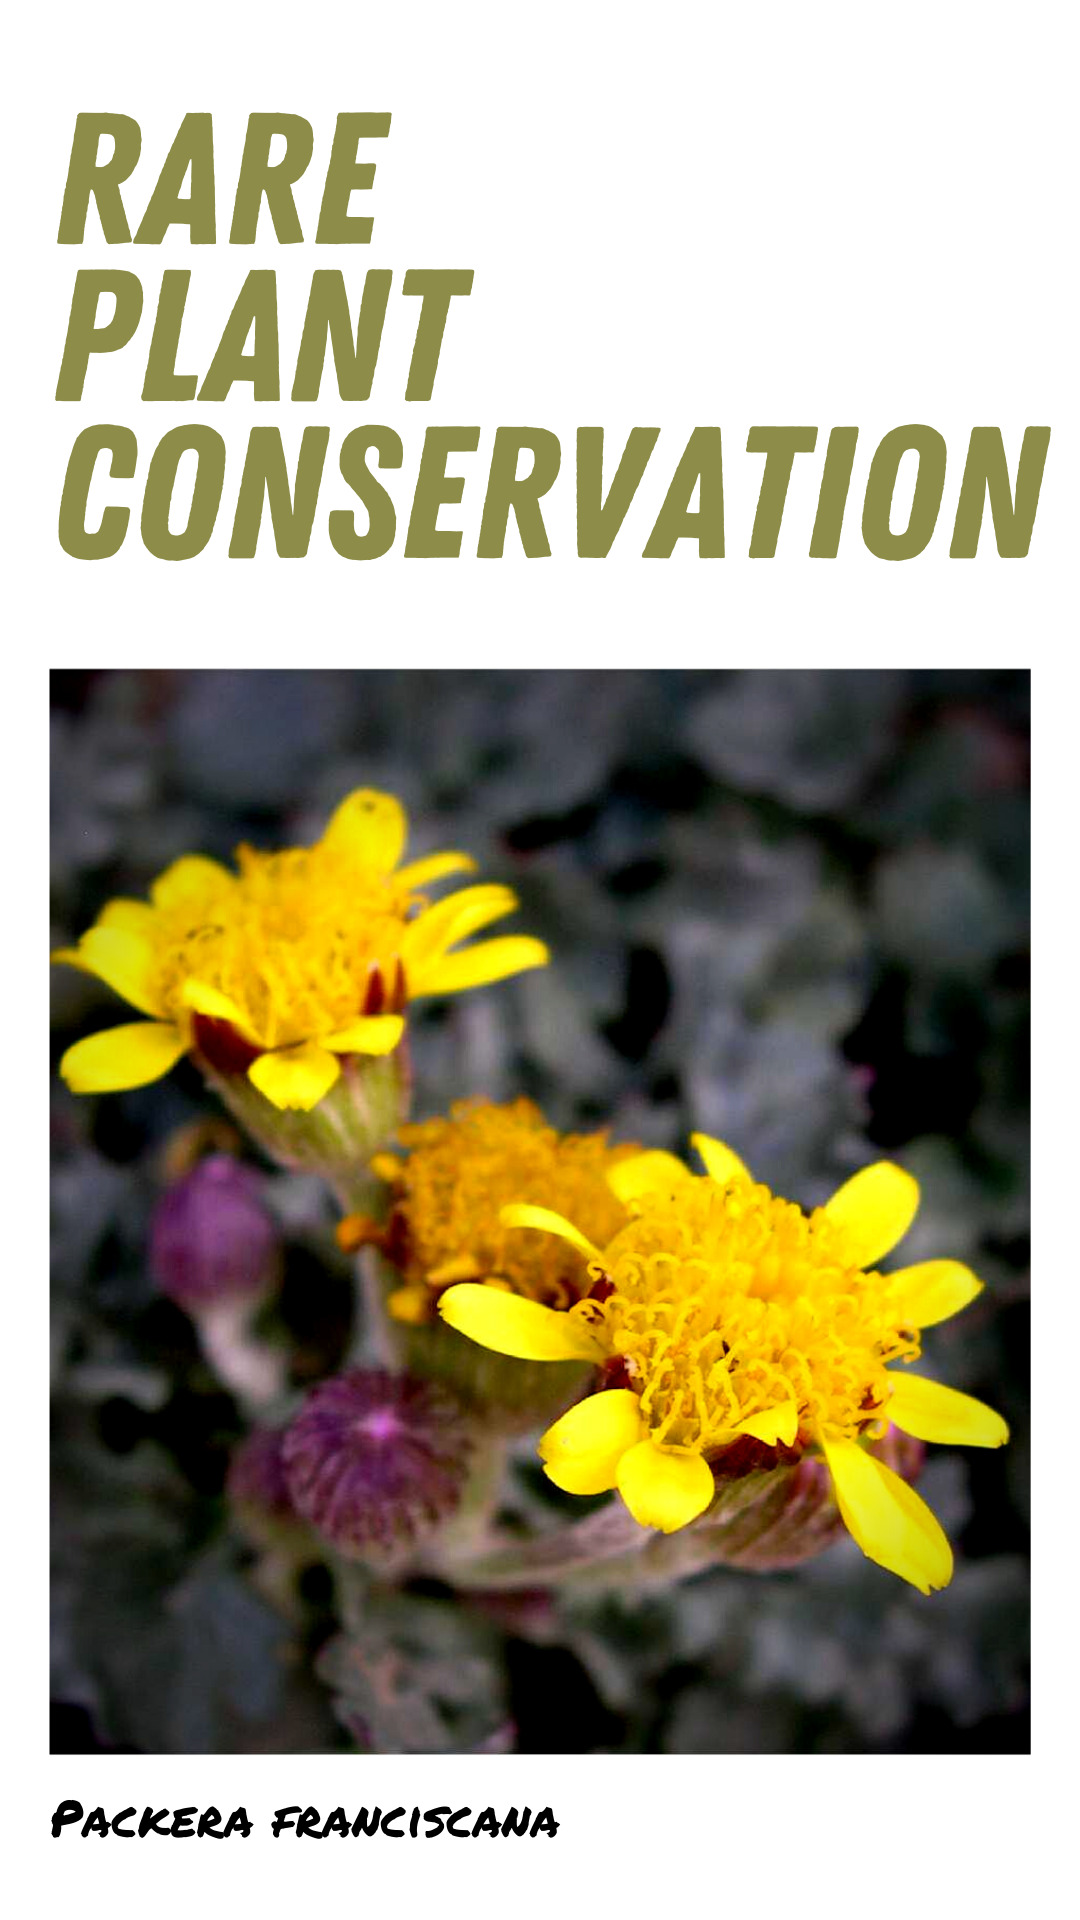 Native Plant Conservation - picture of Packera franciscana